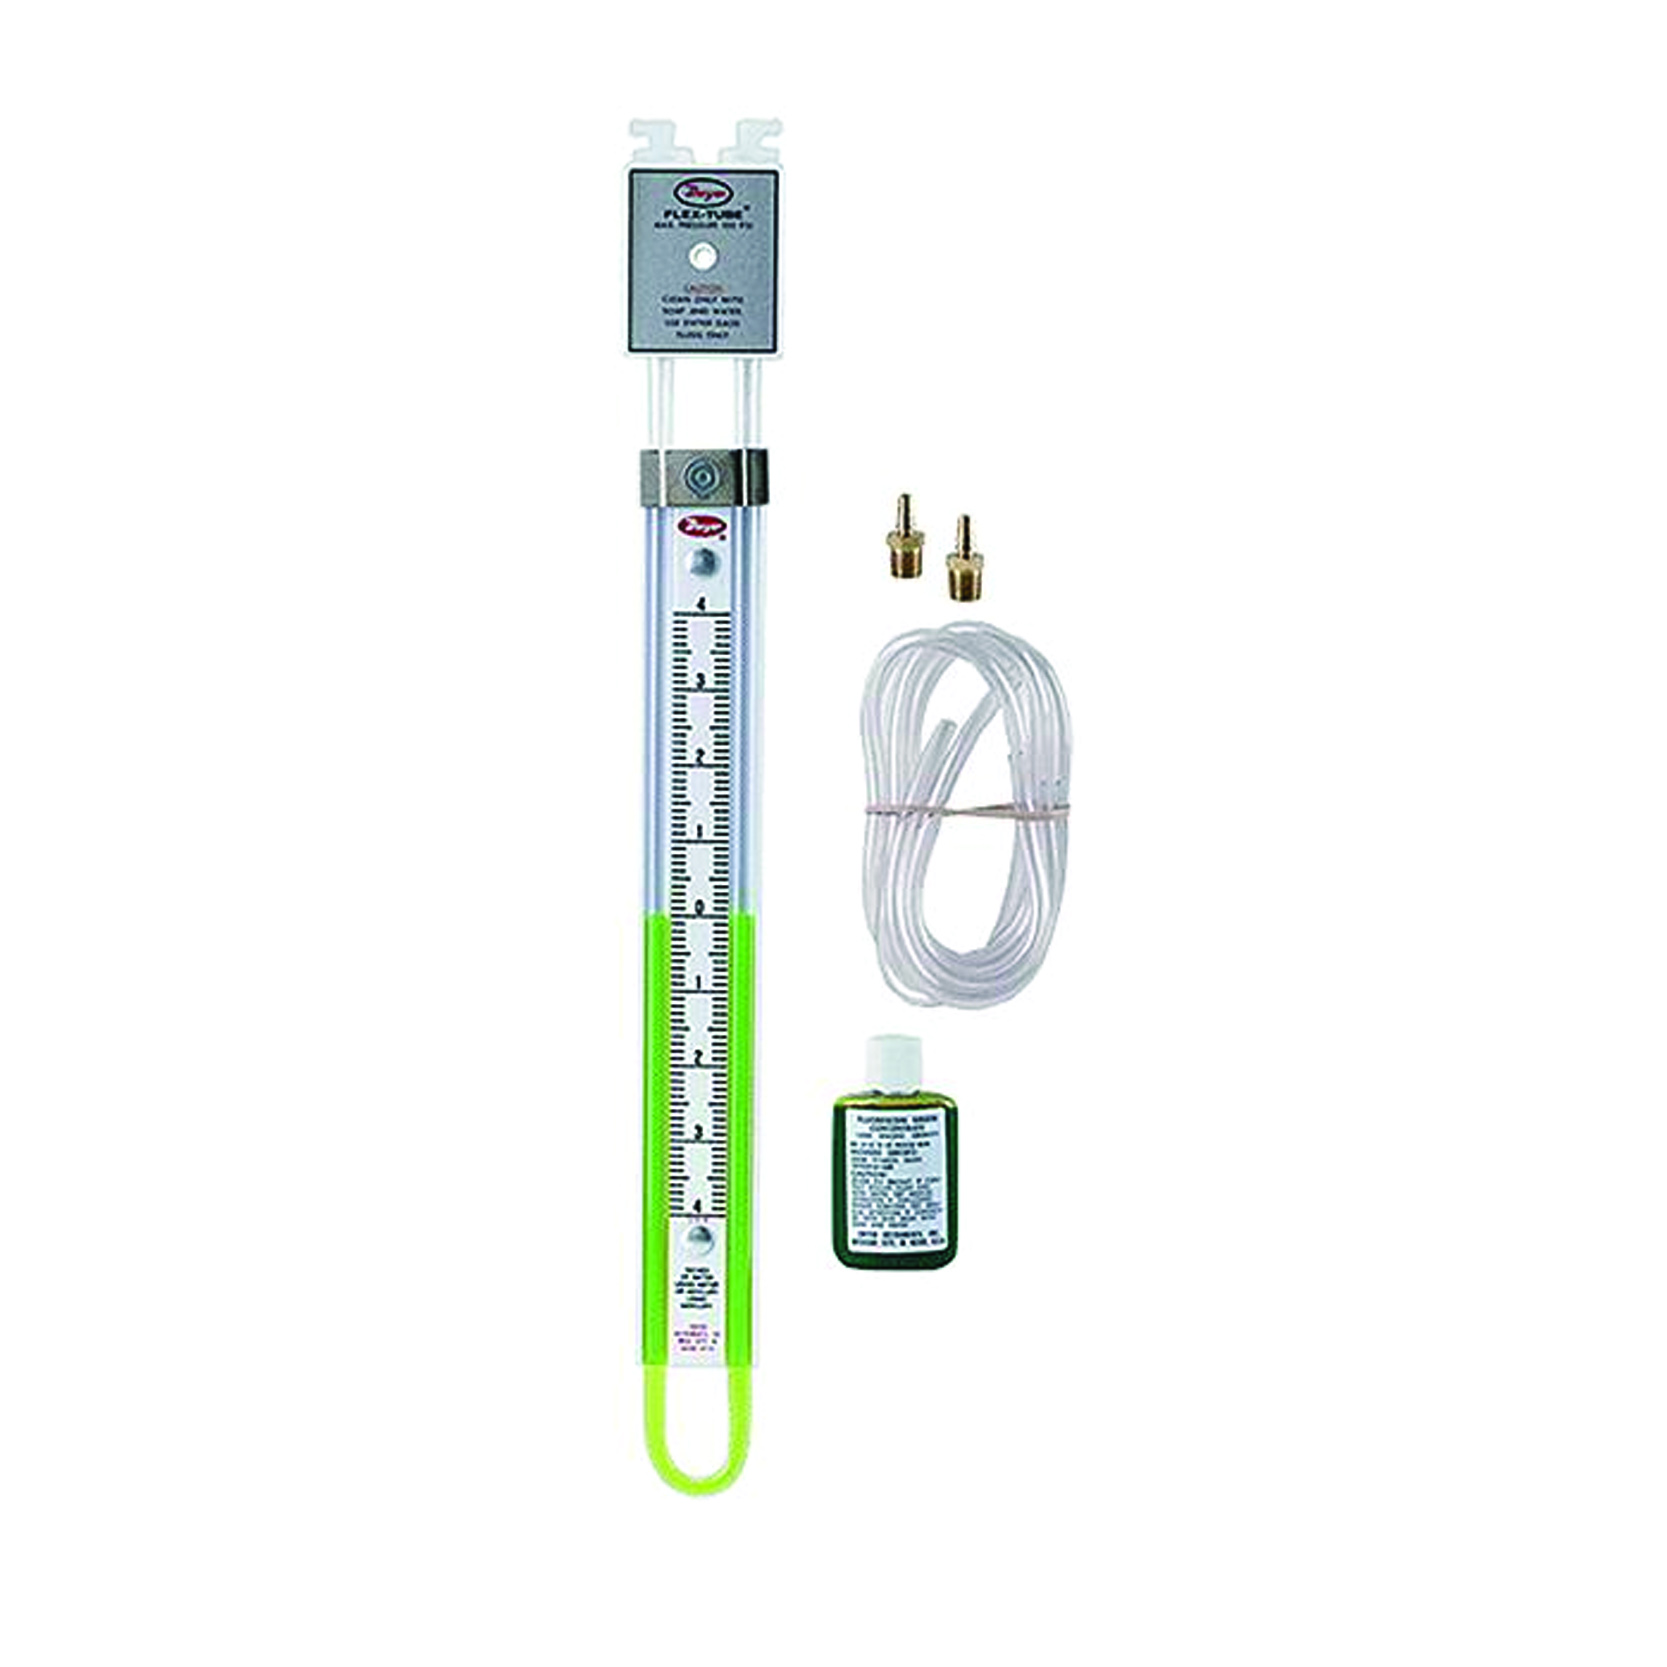 DW1223-16<br/>Dwyer<br/>Water Manometer - 16